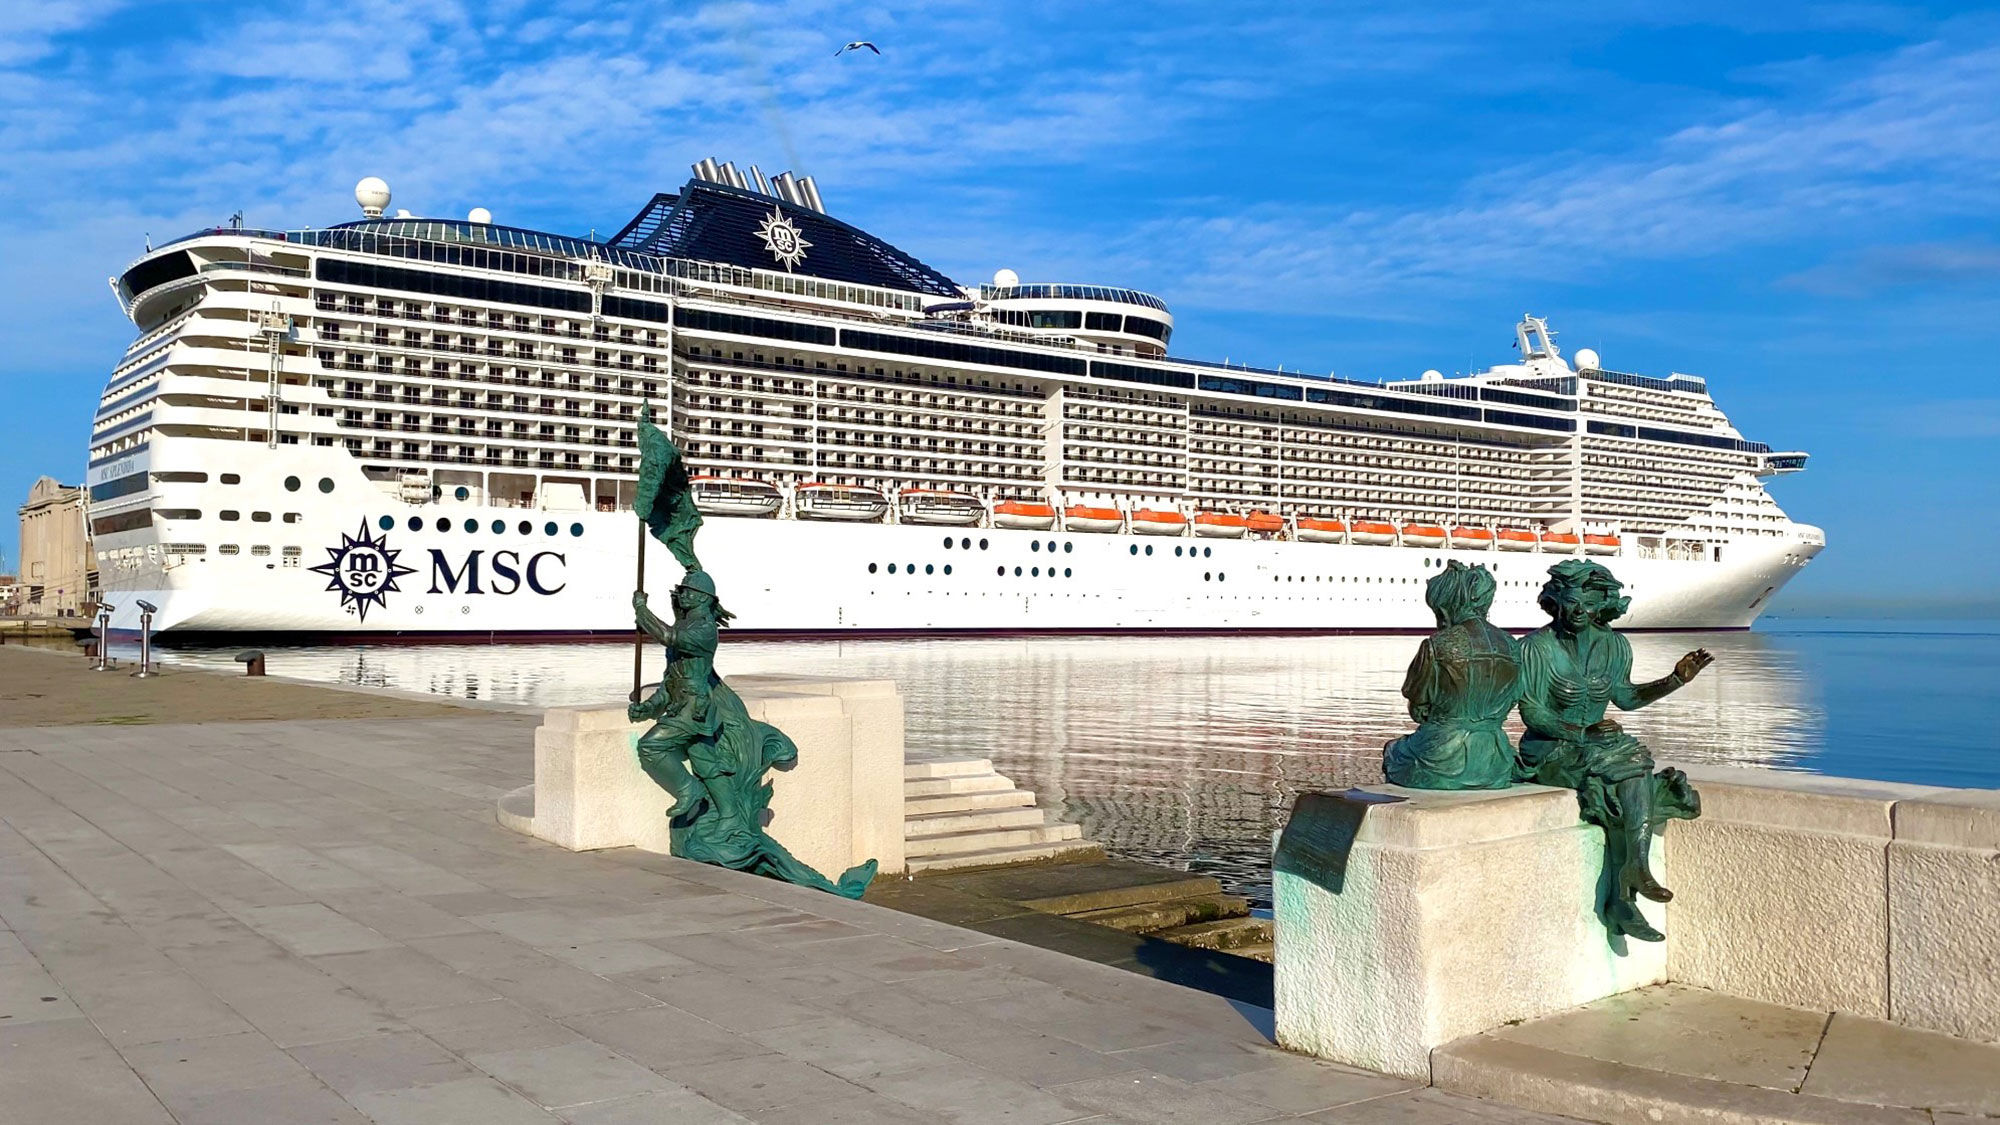 MSC Splendida returns to service with Med cruise: Travel Weekly